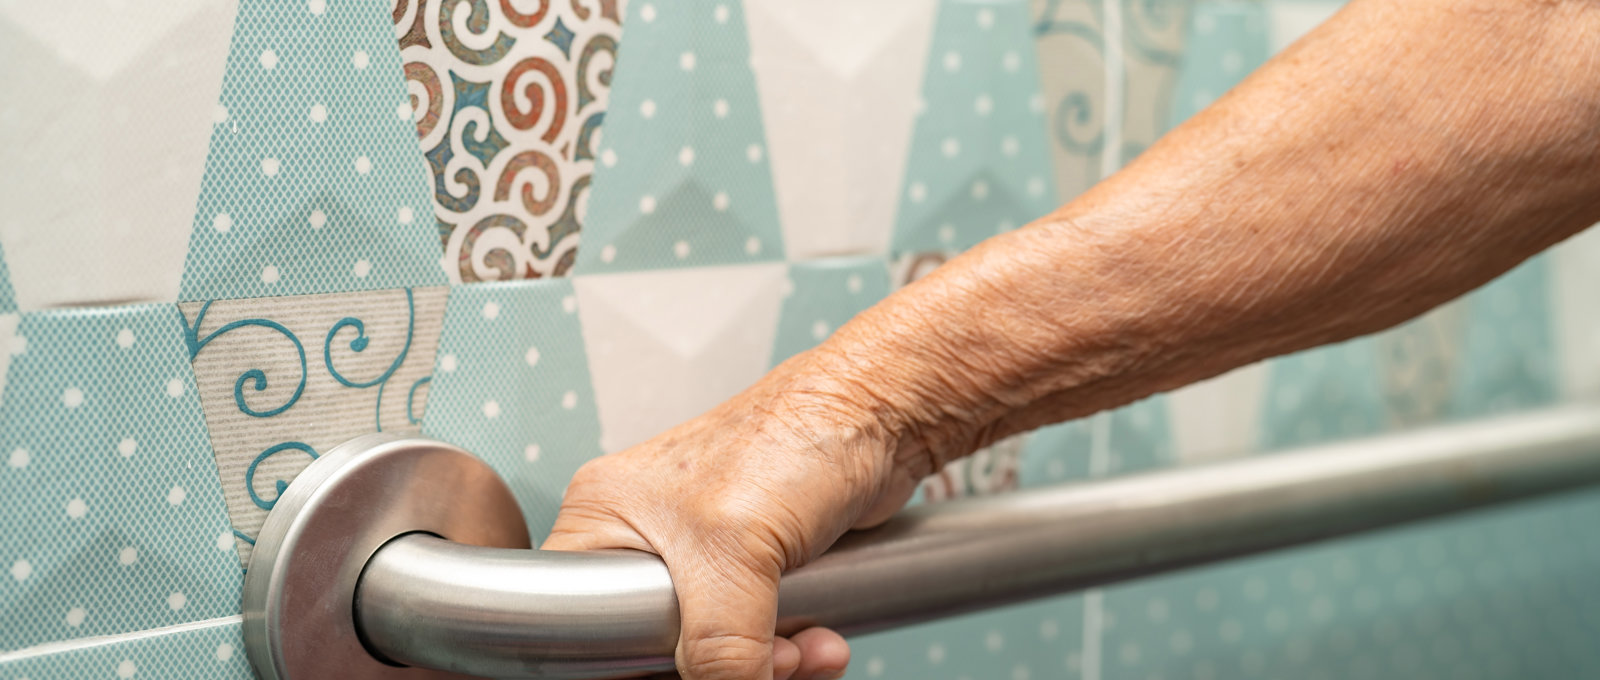 Close-up photo of an elderly woman's hand holding a handrail on a tiled wall